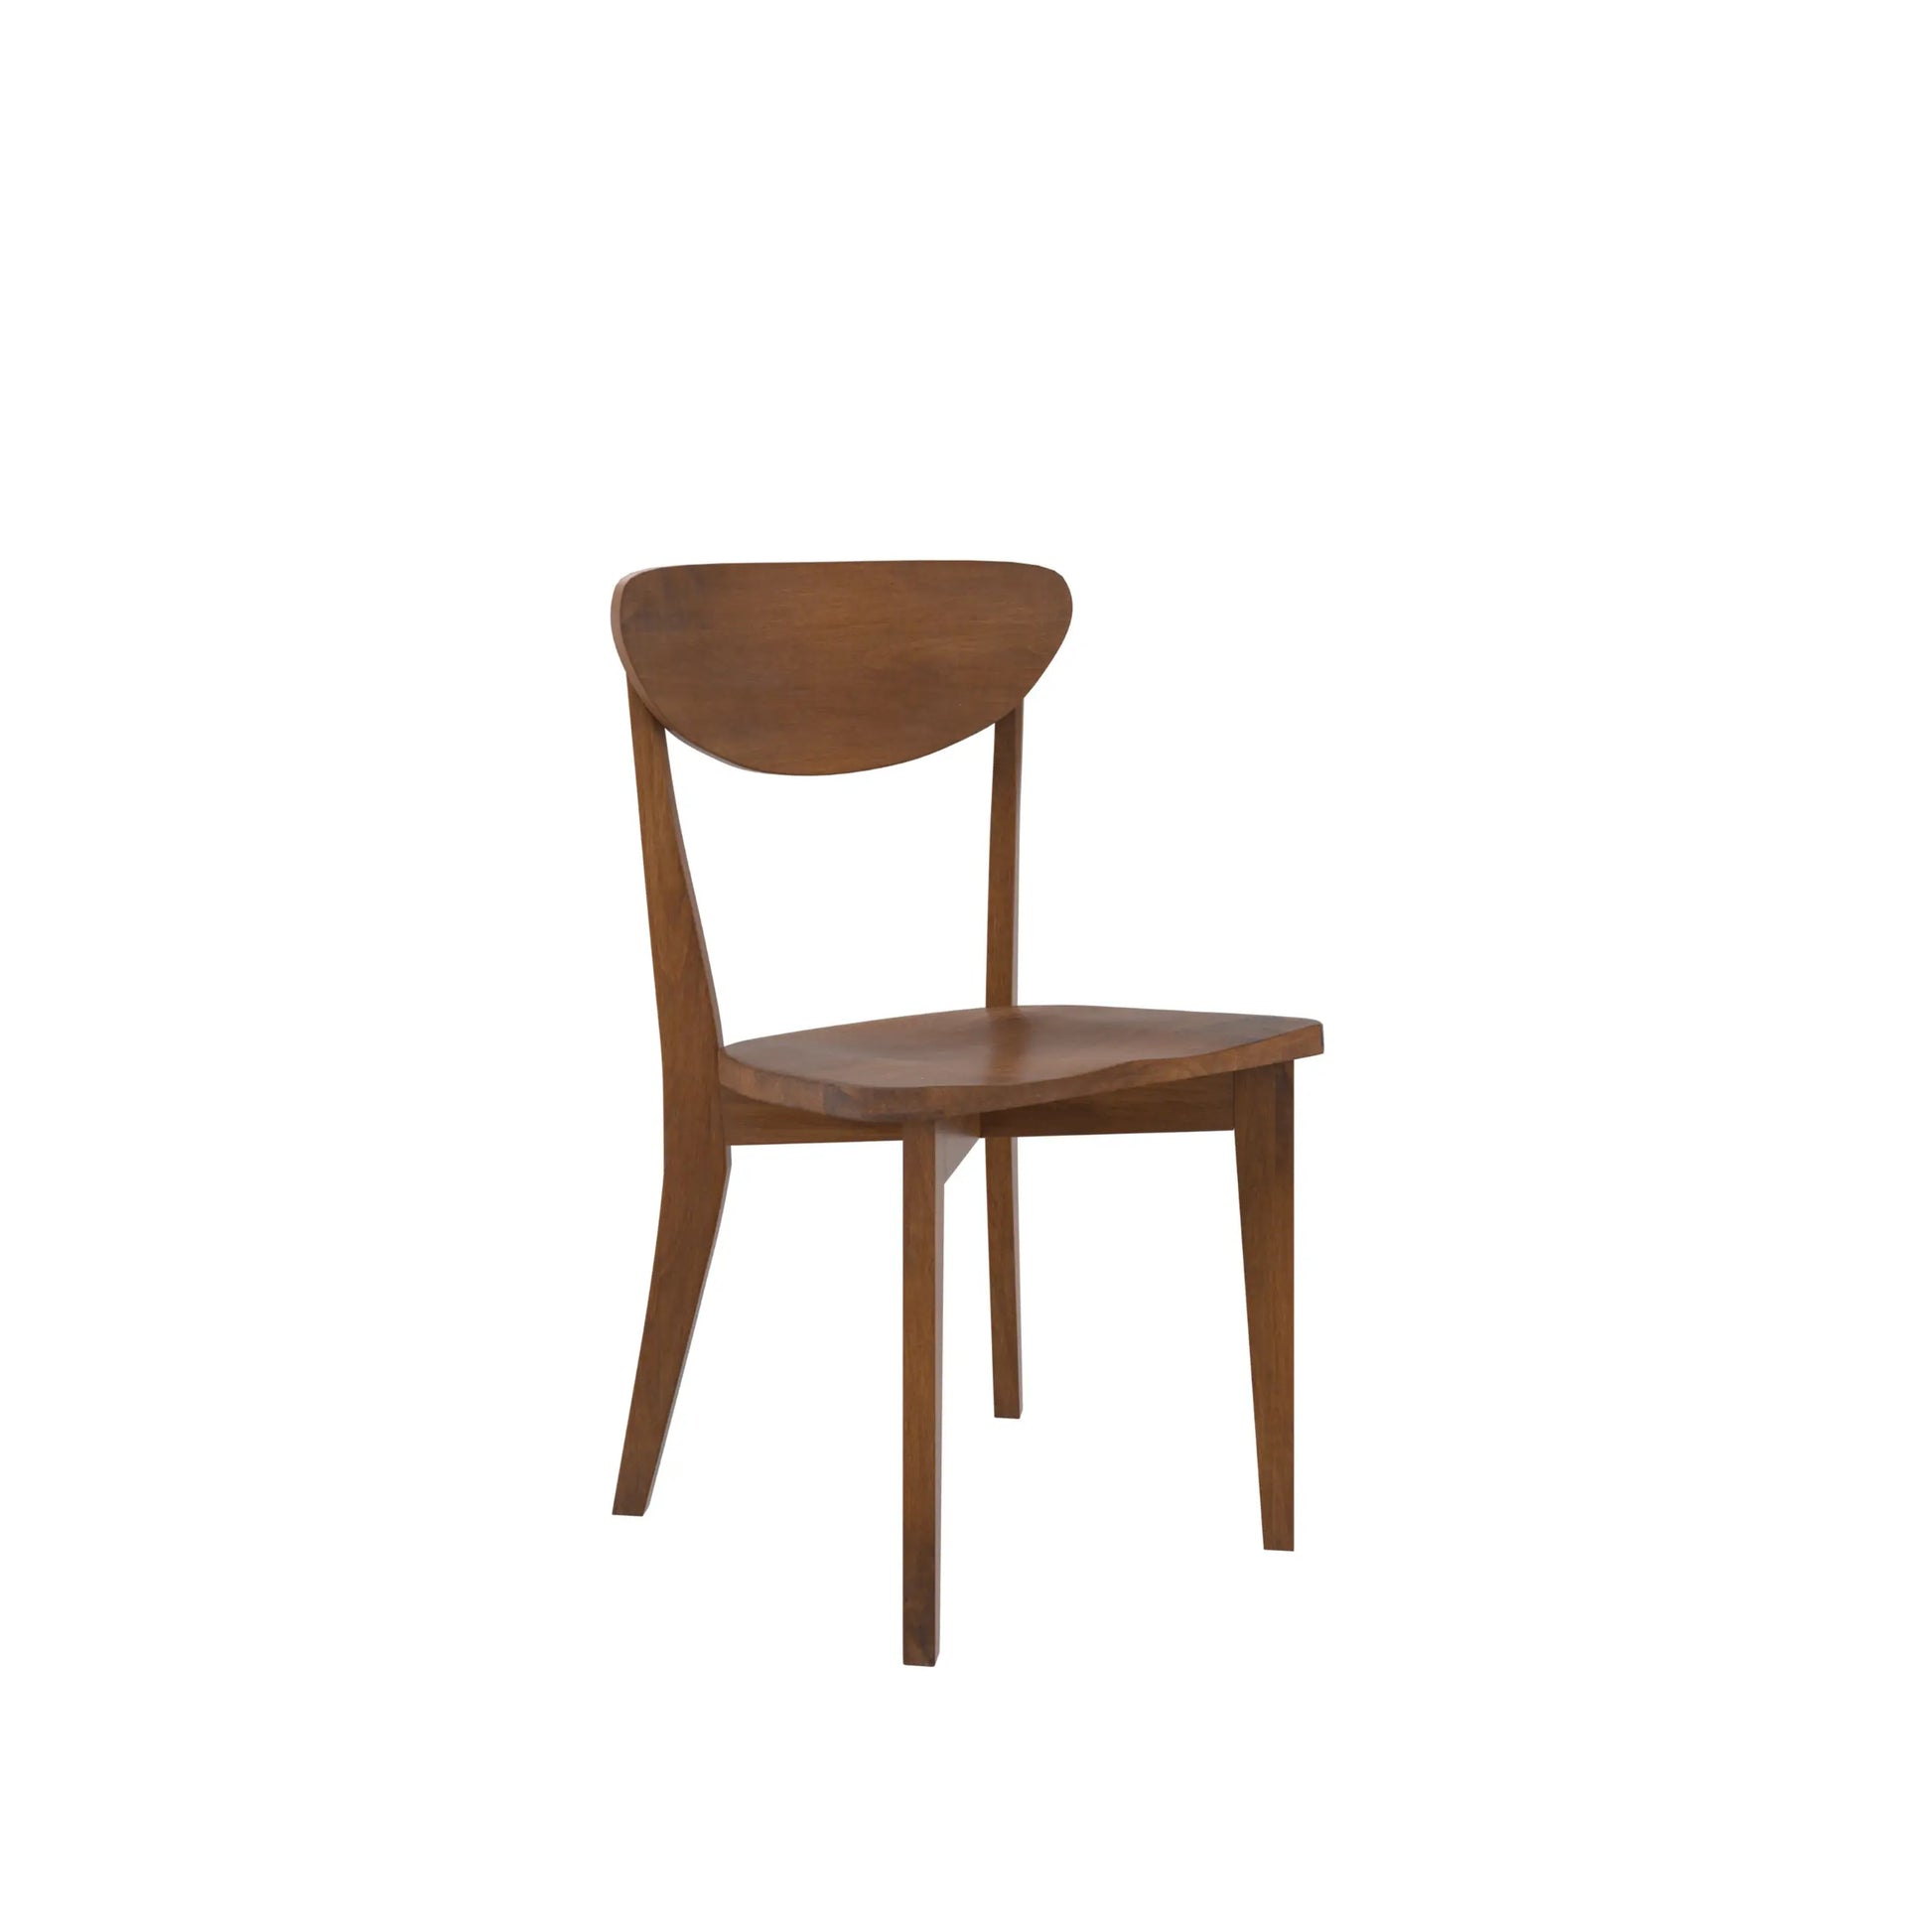 The Seymour - Modern Dining Chair Moderncre8ve